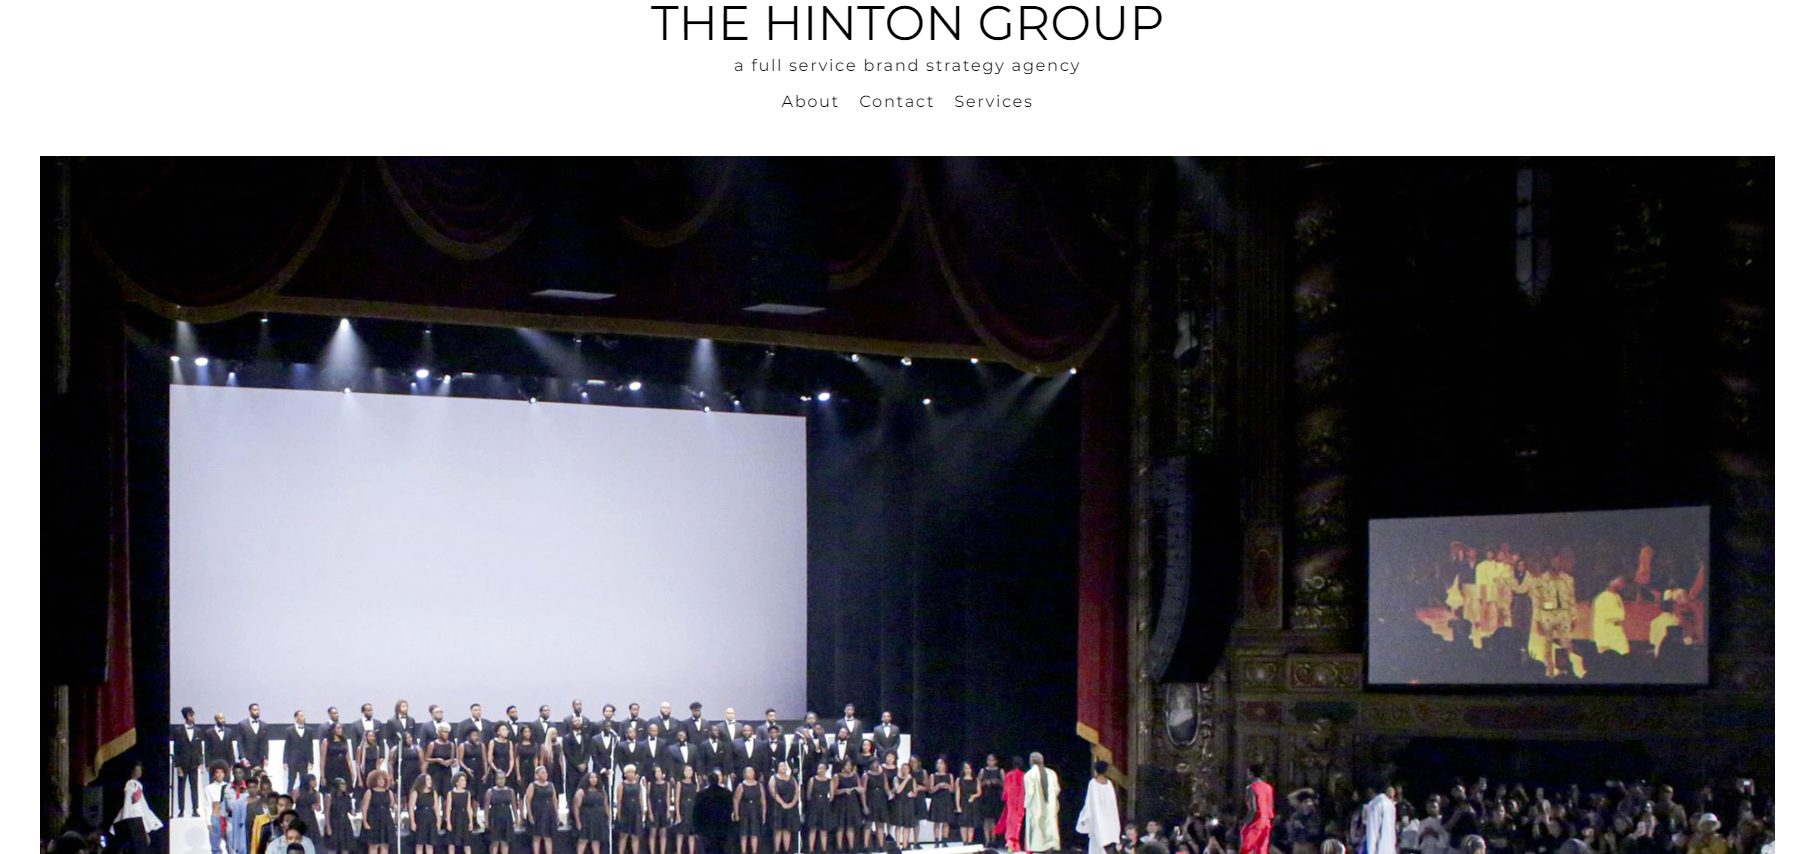 The Hinton Group